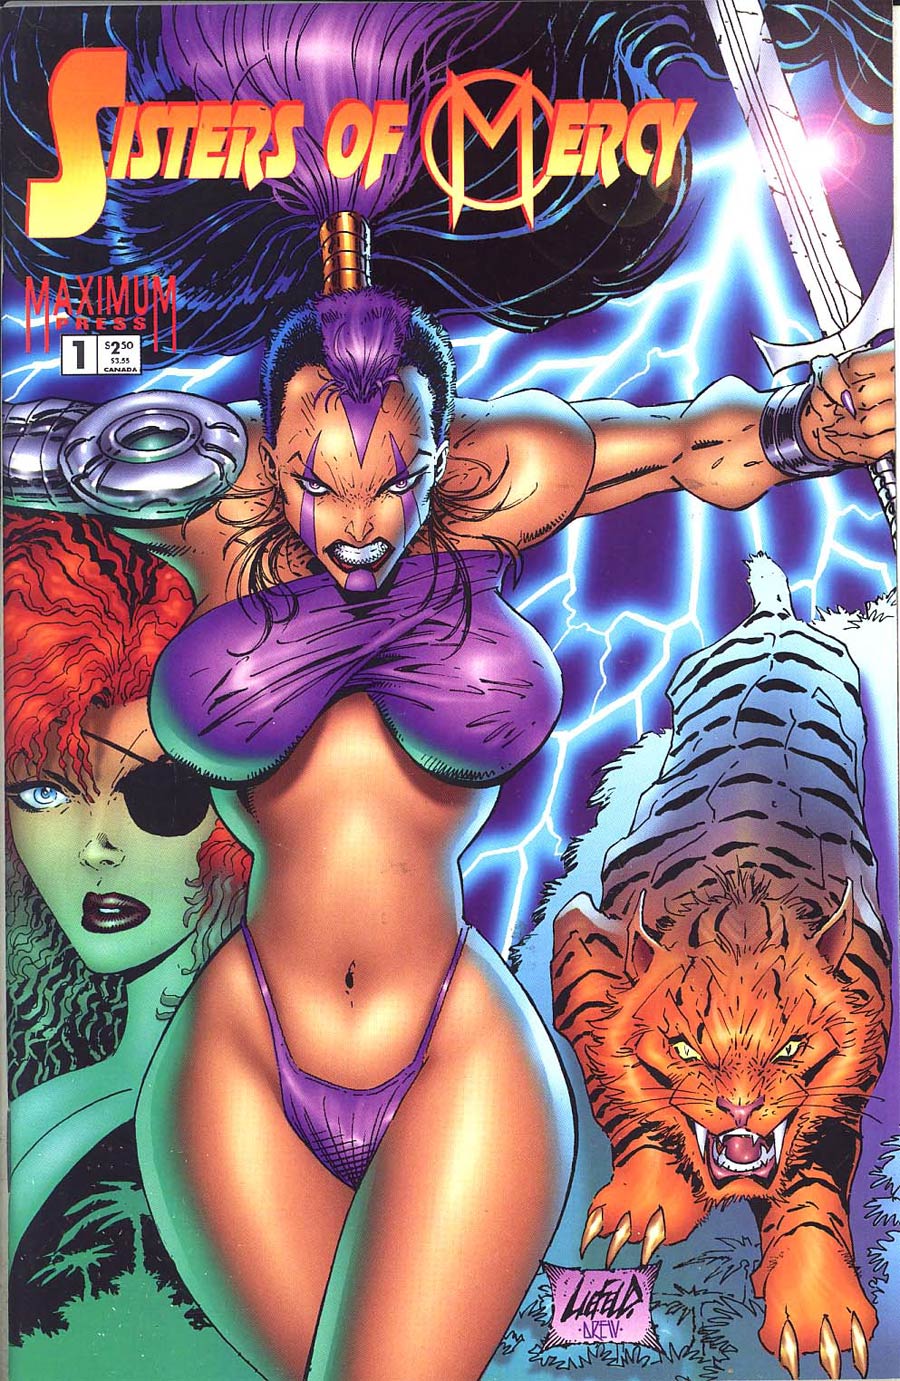 Sisters Of Mercy #1 Cover B Rob Liefeld